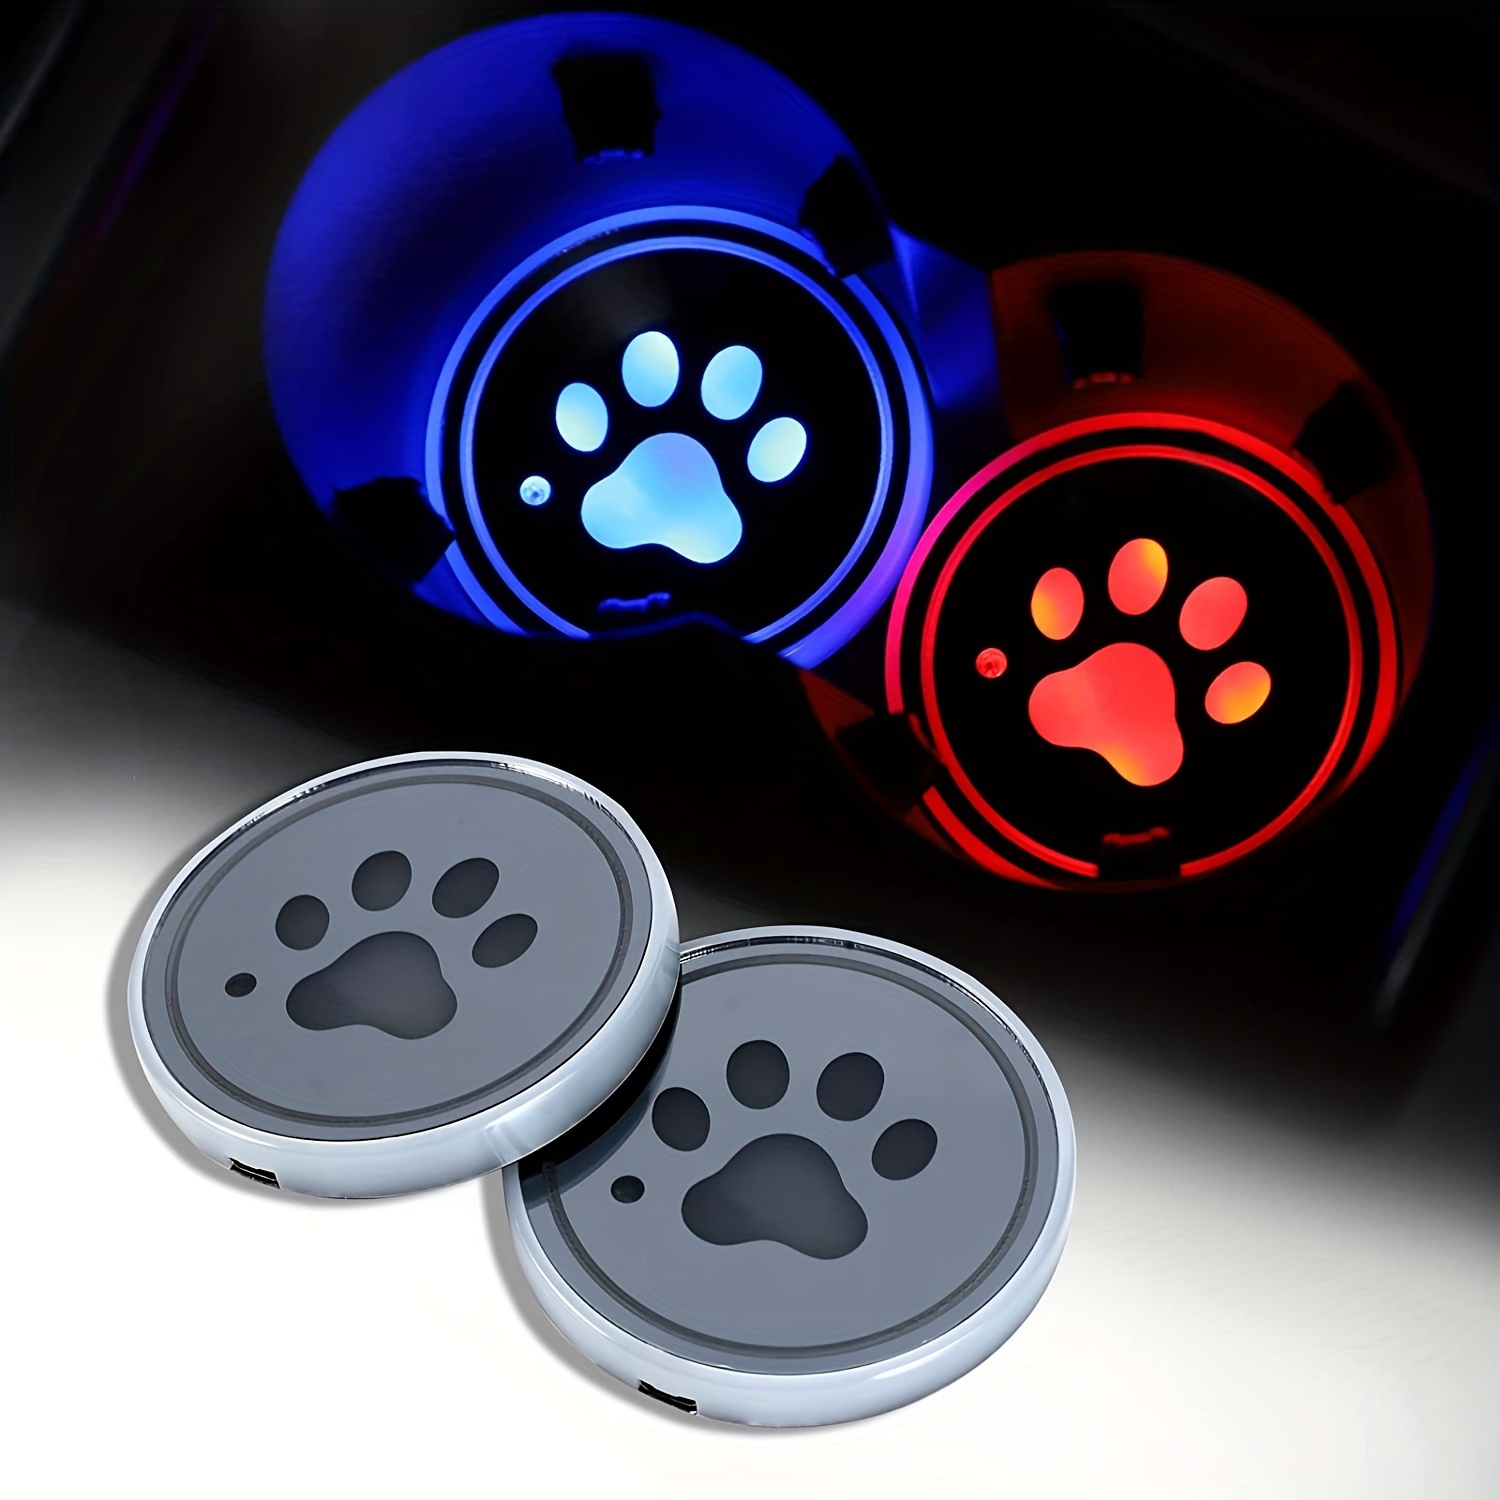 LED Car Coaster Cup Holder Lights Luminescent Pad With USB